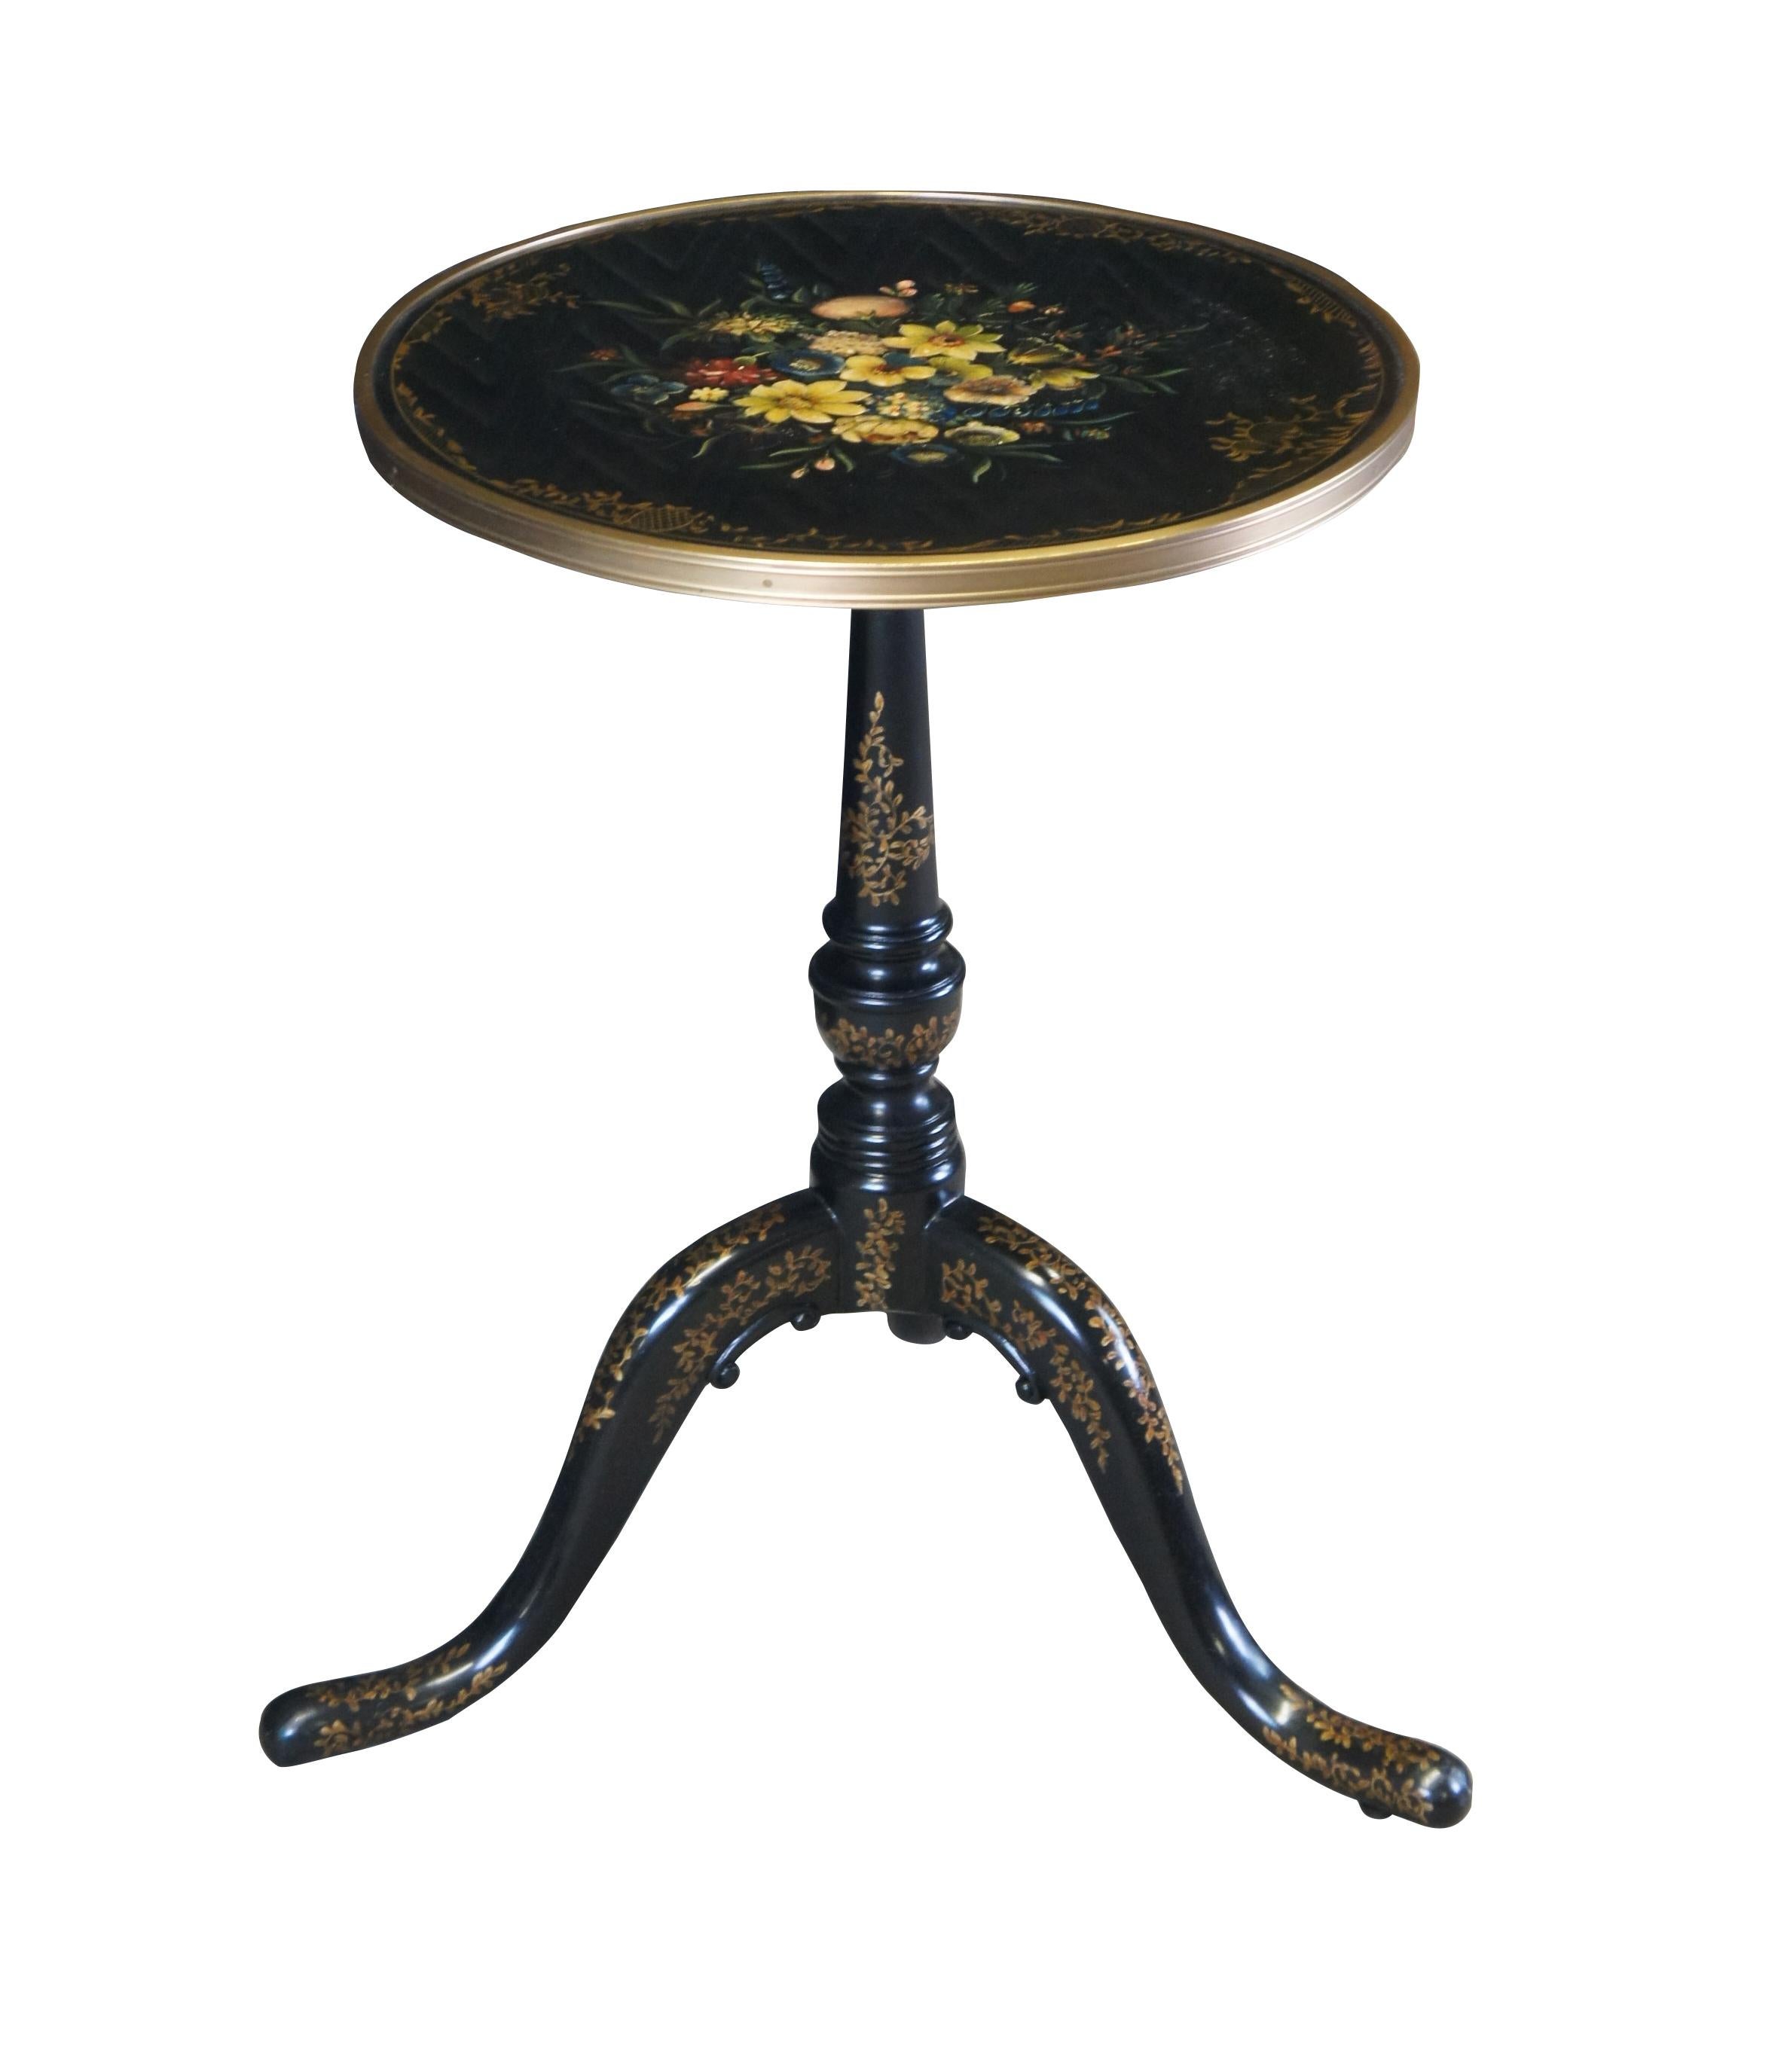 An exquisite side table by Theodore Alexander.  Features a brass banded round top with baroque style floral painted scene.  The top is supported by a graduated baluster turned support with trophy urn towards the bottom and ribbed accents.  The